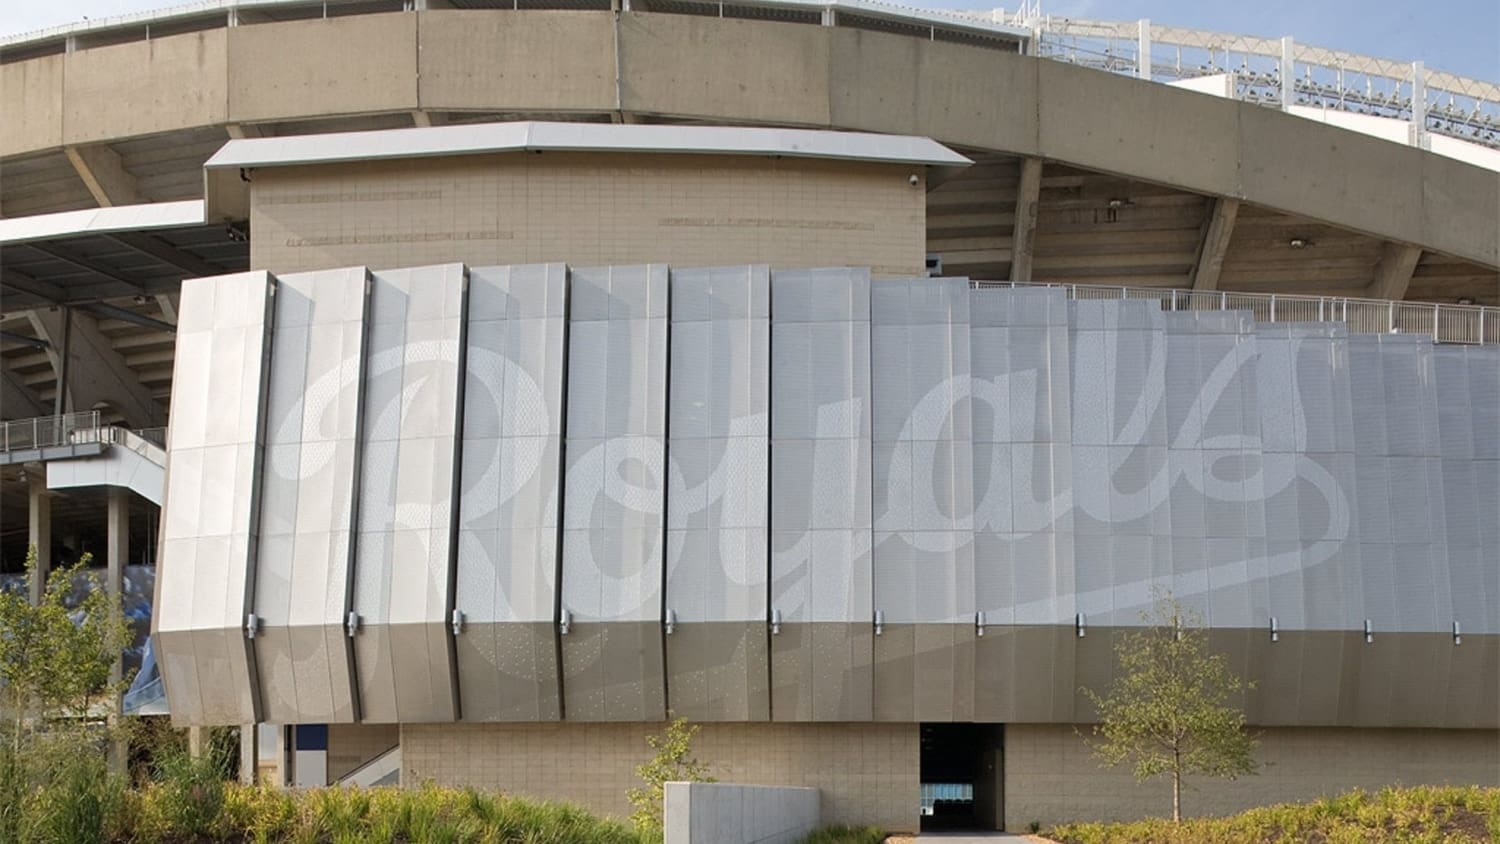 KAUFFMAN STADIUM FACADE WITH PERFORATED “ROYALS” LOGO EMBLAZONED ON ITS WALL.